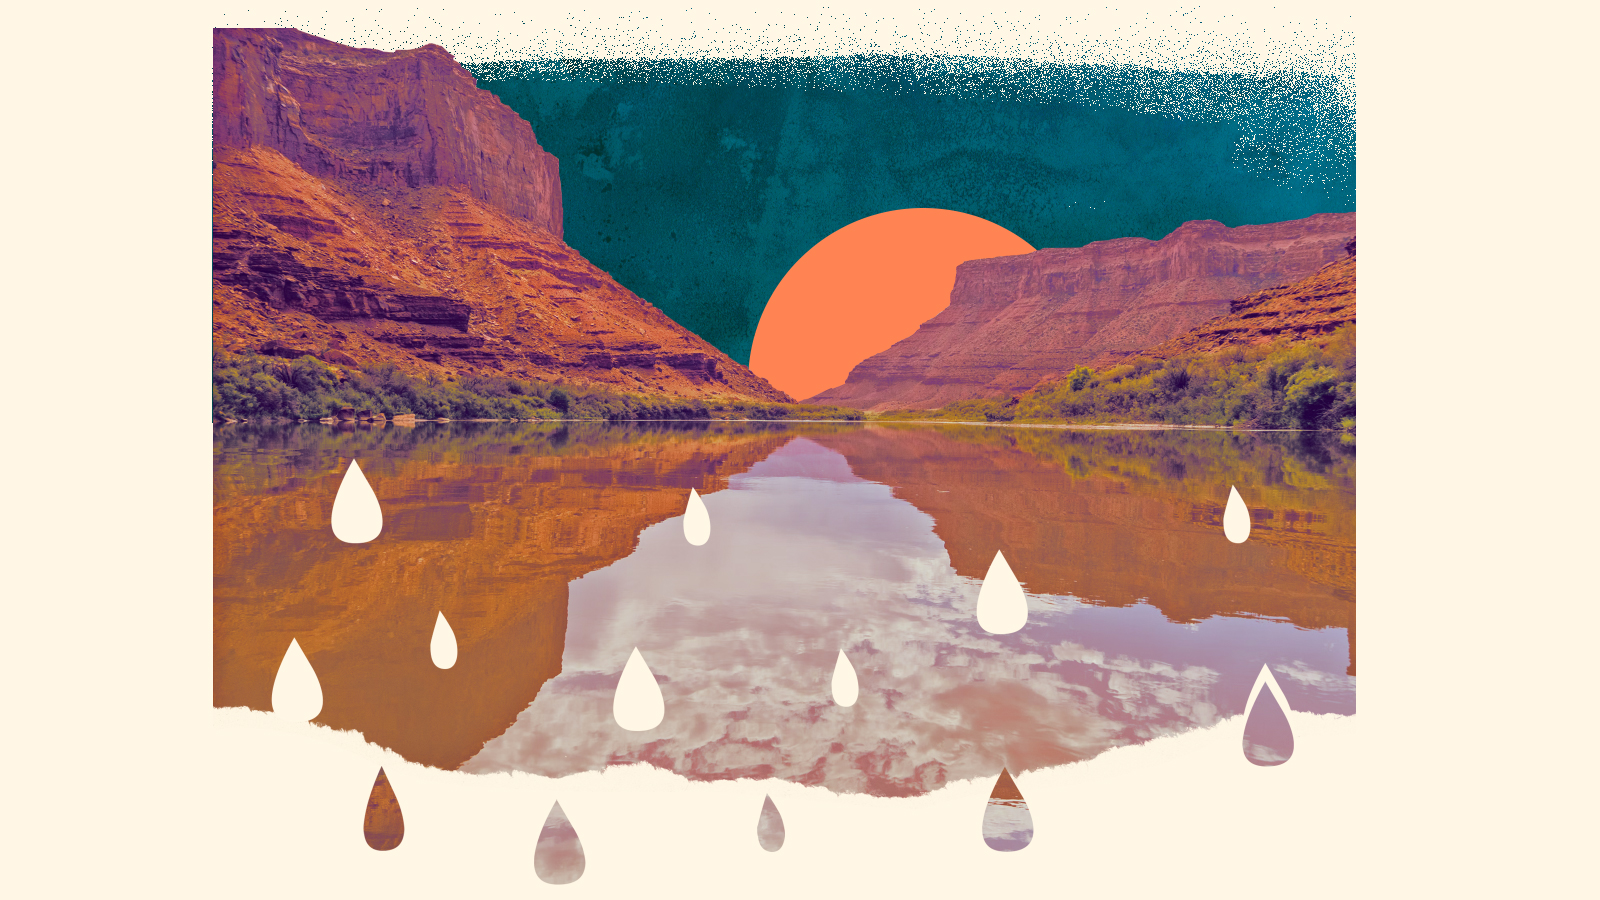 Collage: canyon hills and water reflecting the sky, with watercolor sky and an orange sun; water droplet shapes have been cut out of the water